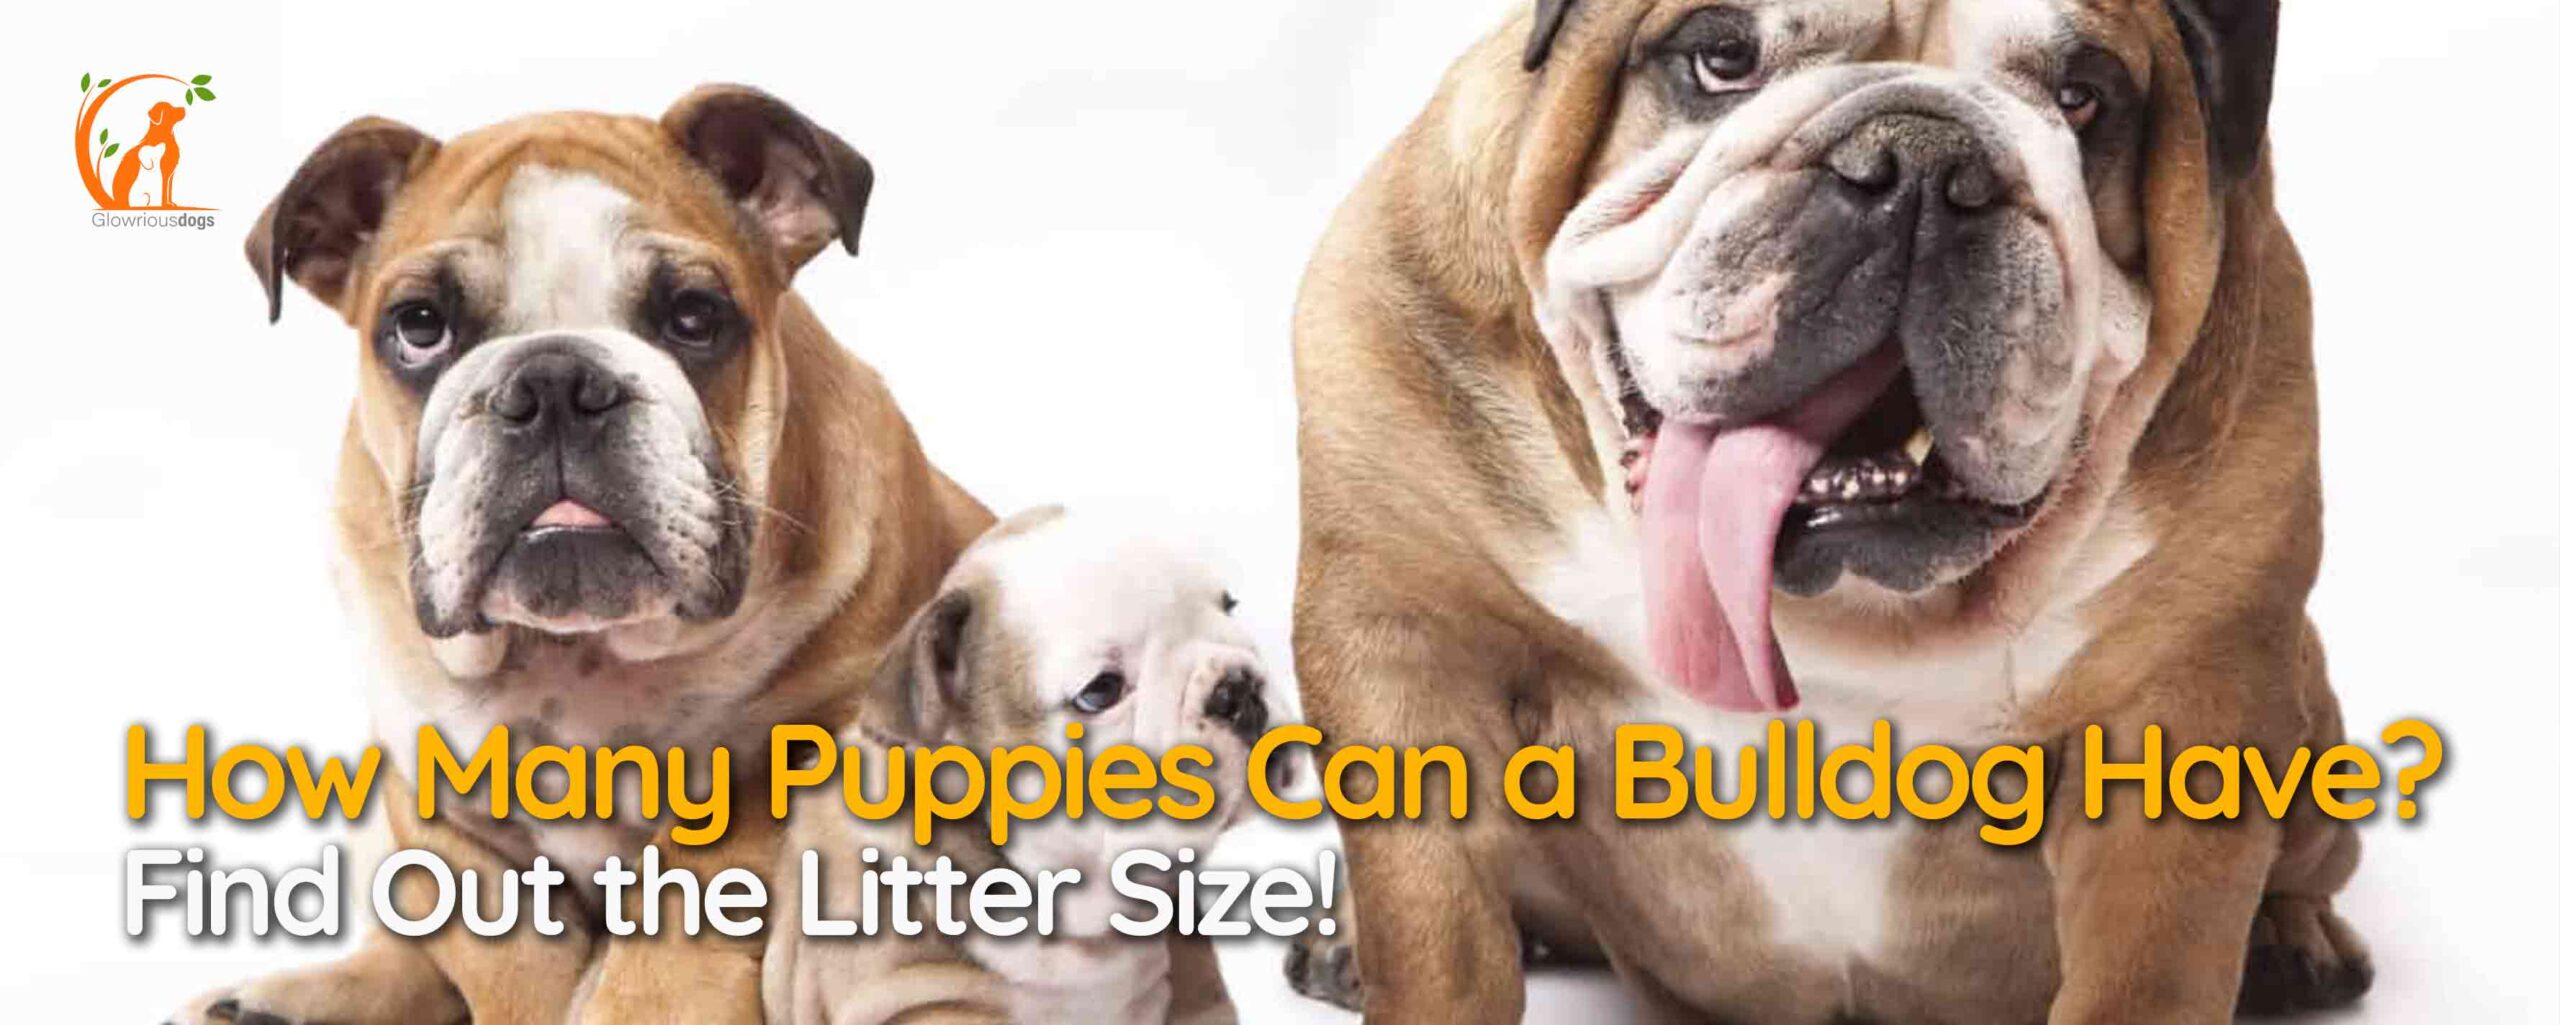 How Many Puppies Can a Bulldog Have? Find Out the Litter Size!